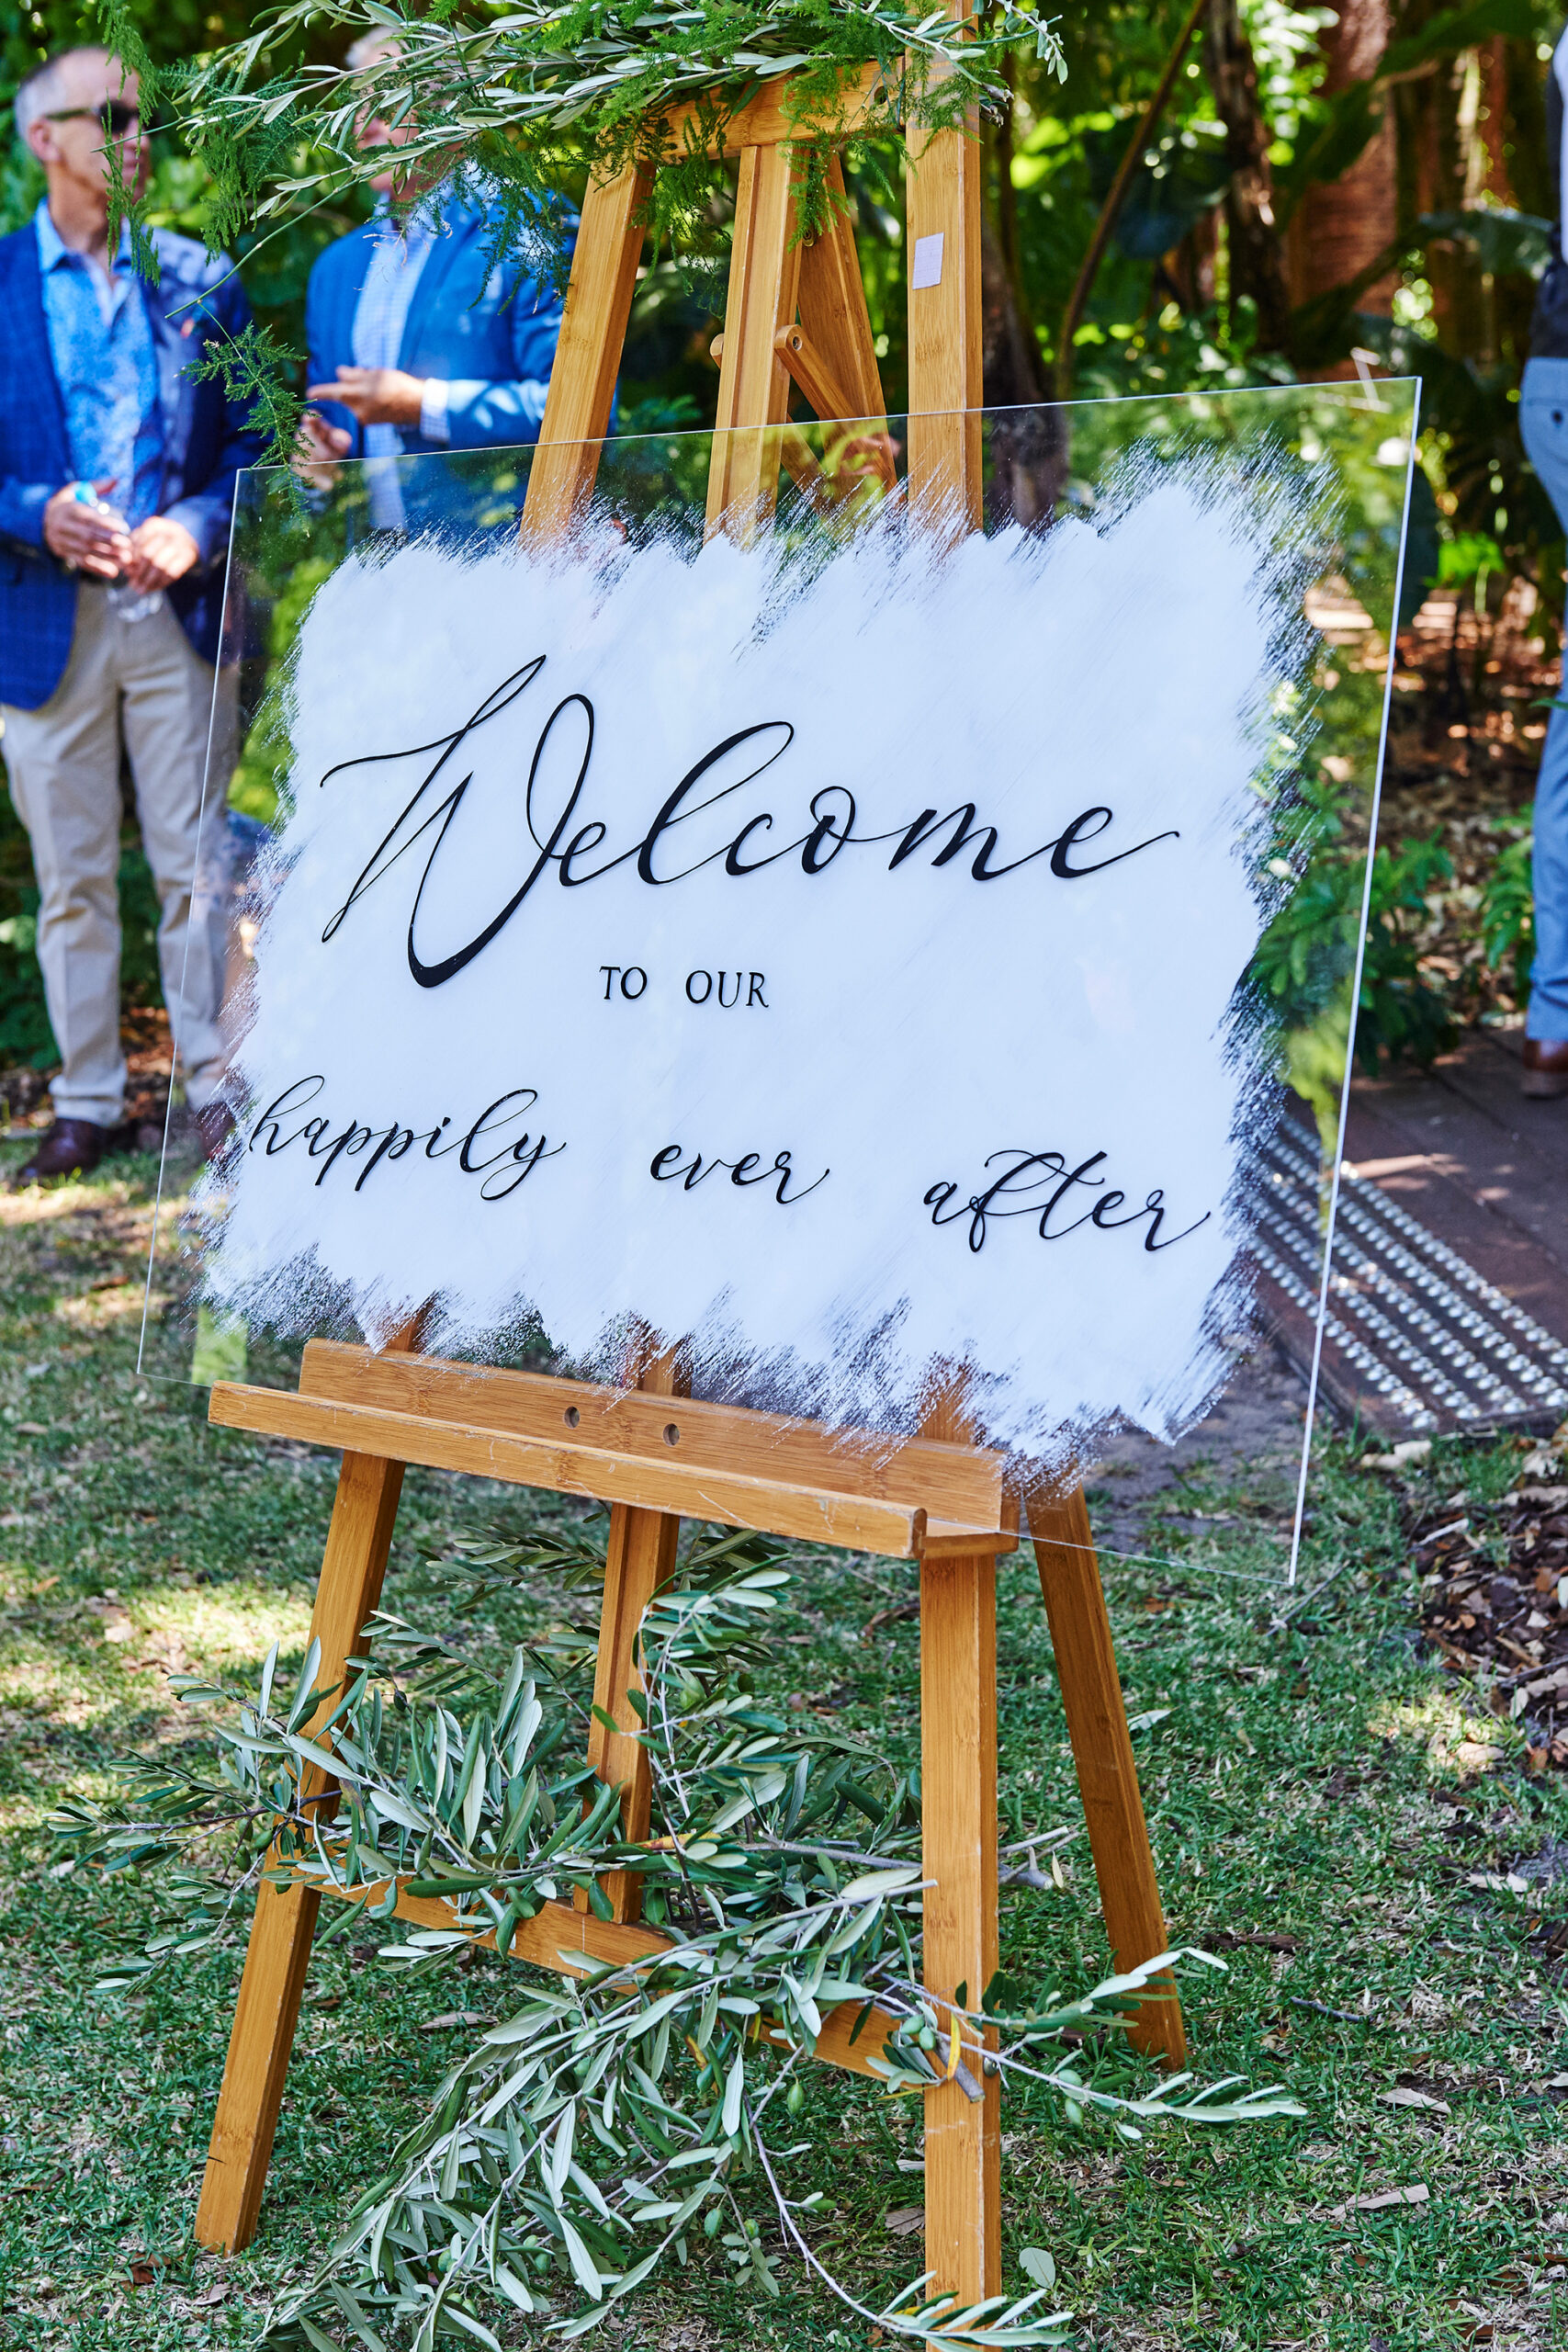 Kristina Sam Relaxed Rustic Wedding Peter Edwards Photography SBS 011 scaled